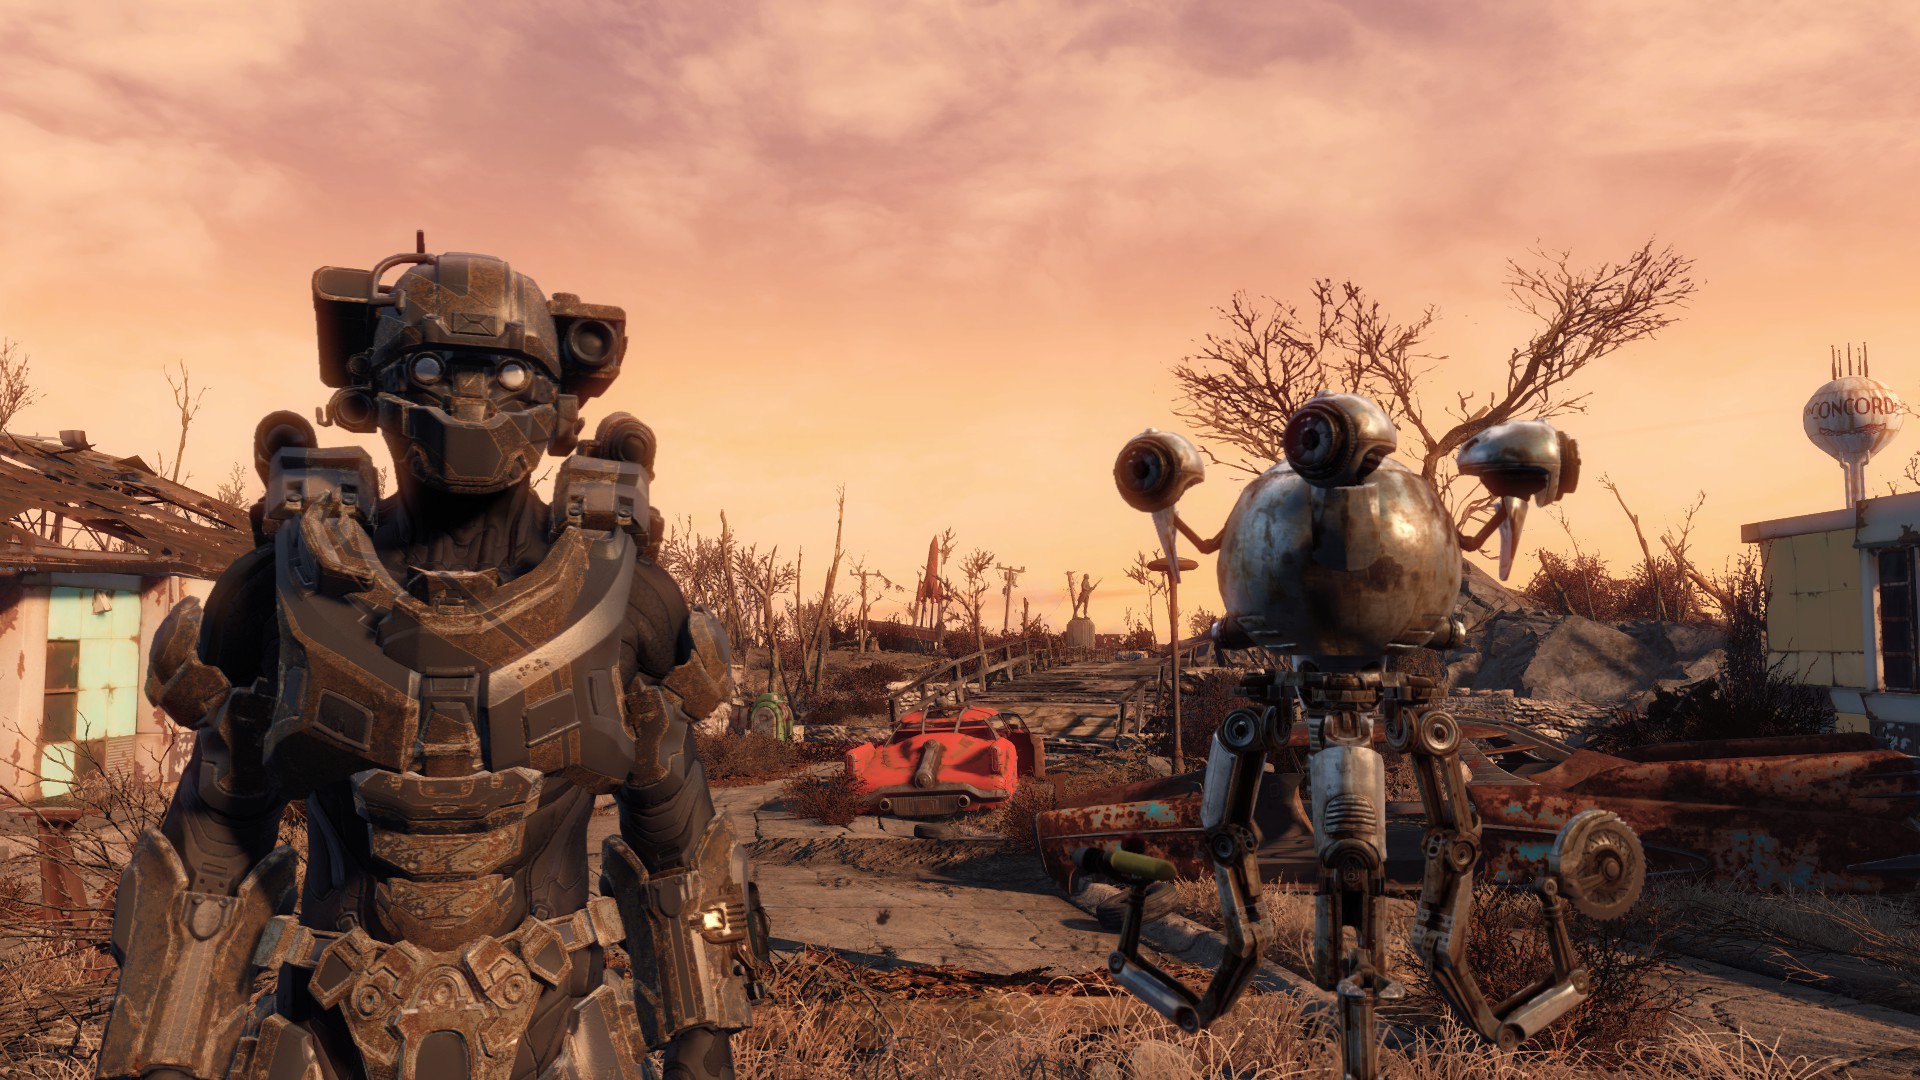 on Twitter: "I just downloaded a mod for Fallout 4 that adds tons of H...